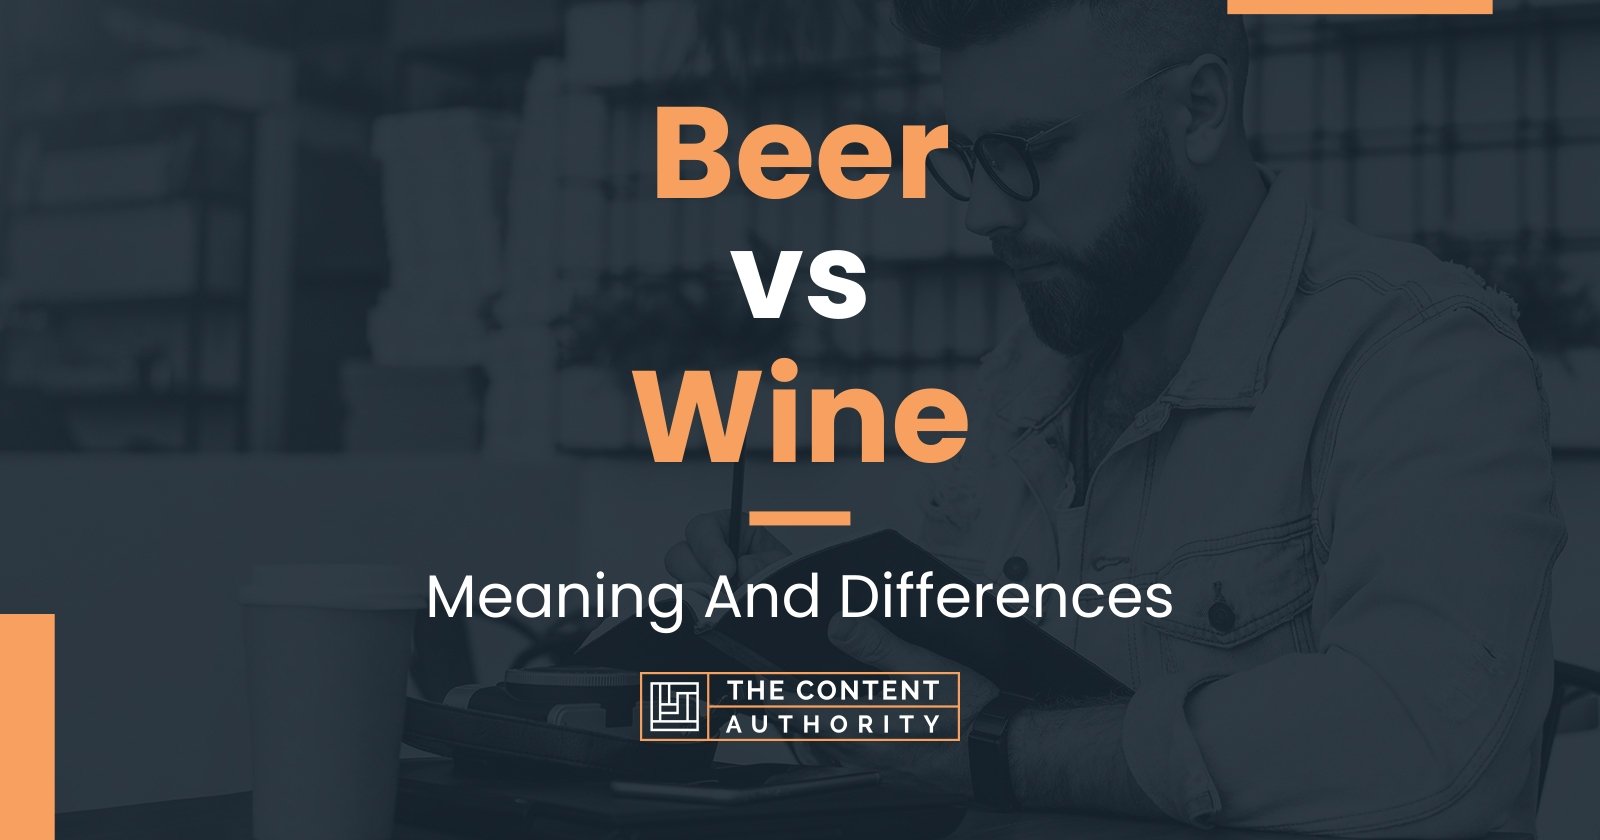 Beer vs Wine: Meaning And Differences